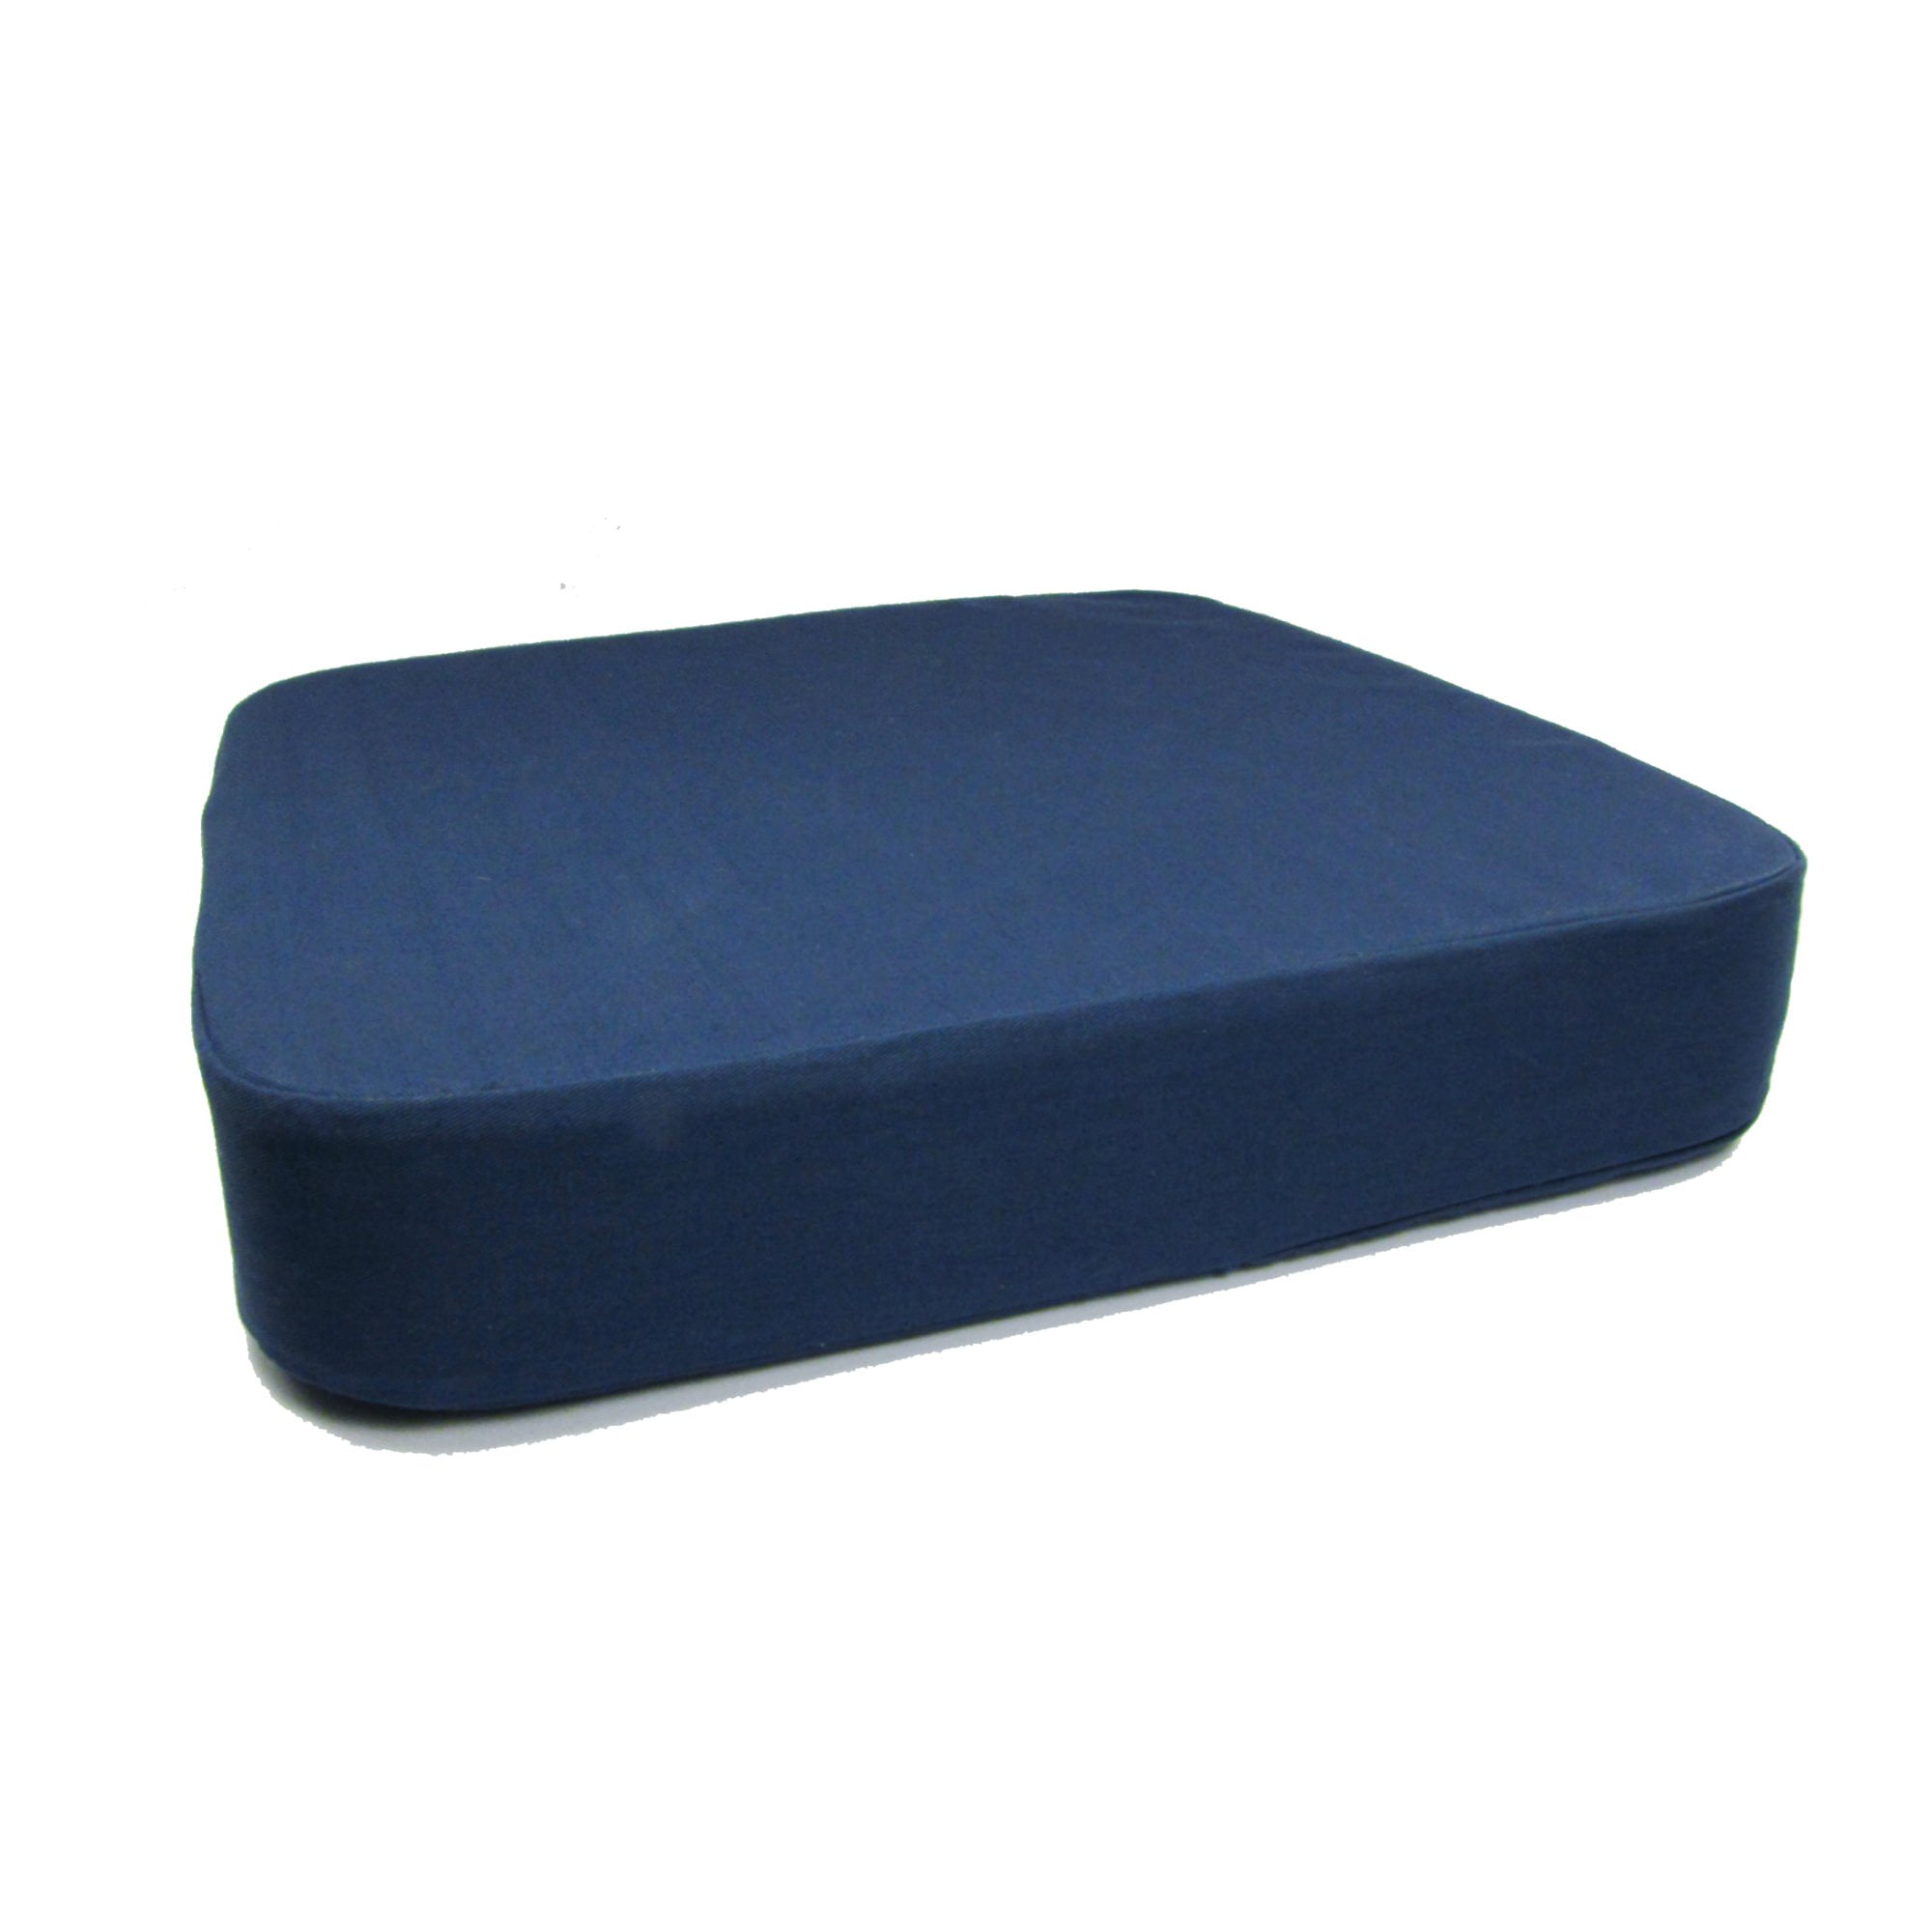 EXTRA THICK Dreamsweet Memory Foam Dual Layer Seat Cushion Pad for